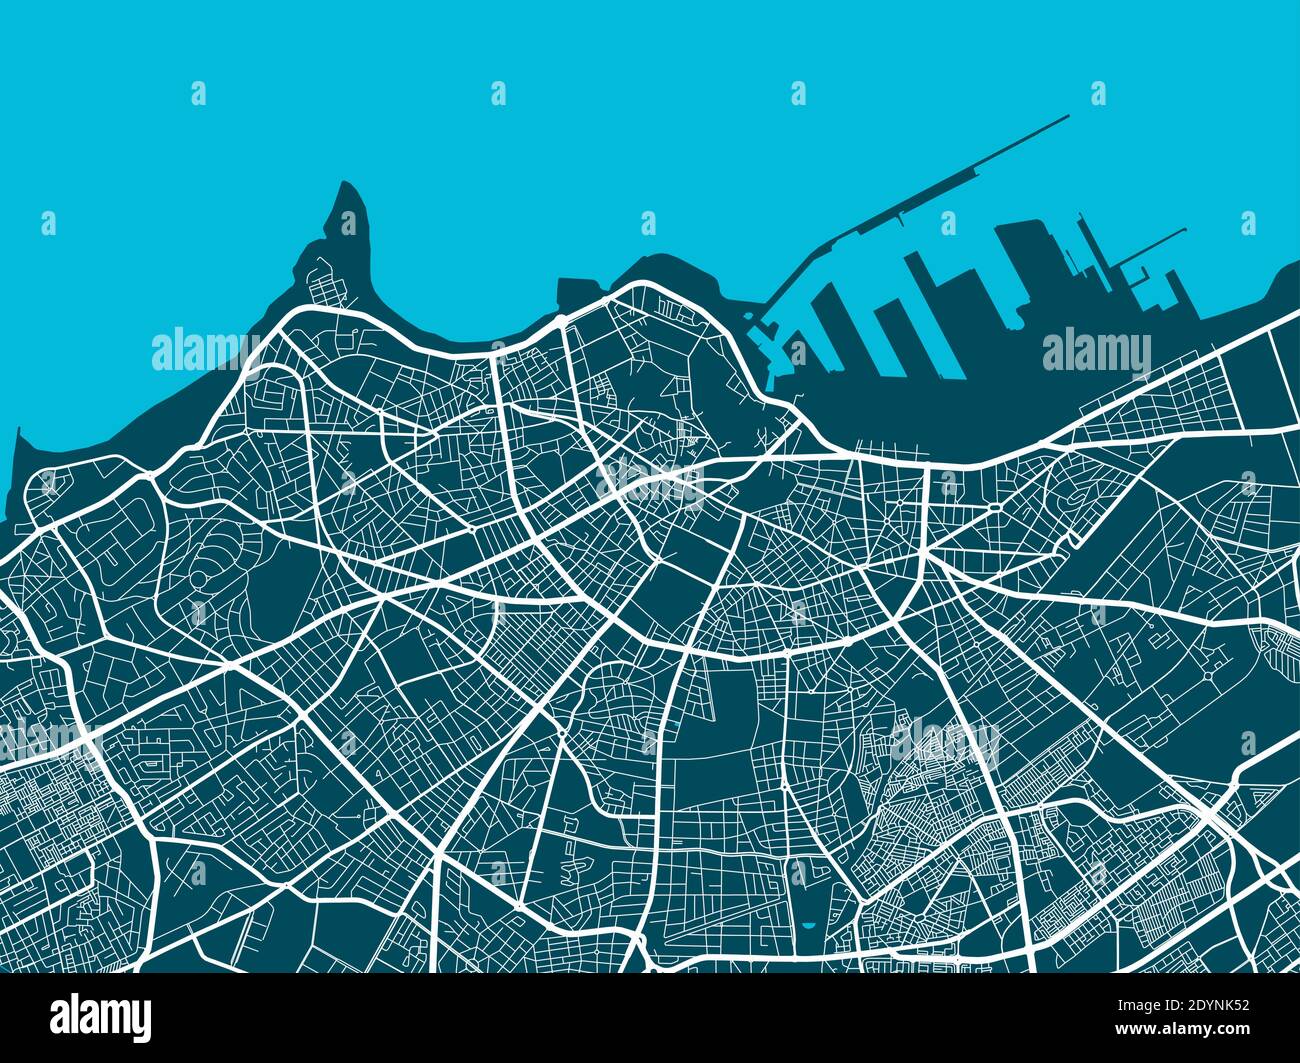 Detailed map of Casablanca city administrative area. Royalty free vector illustration. Cityscape panorama. Decorative graphic tourist map of Casablanc Stock Vector